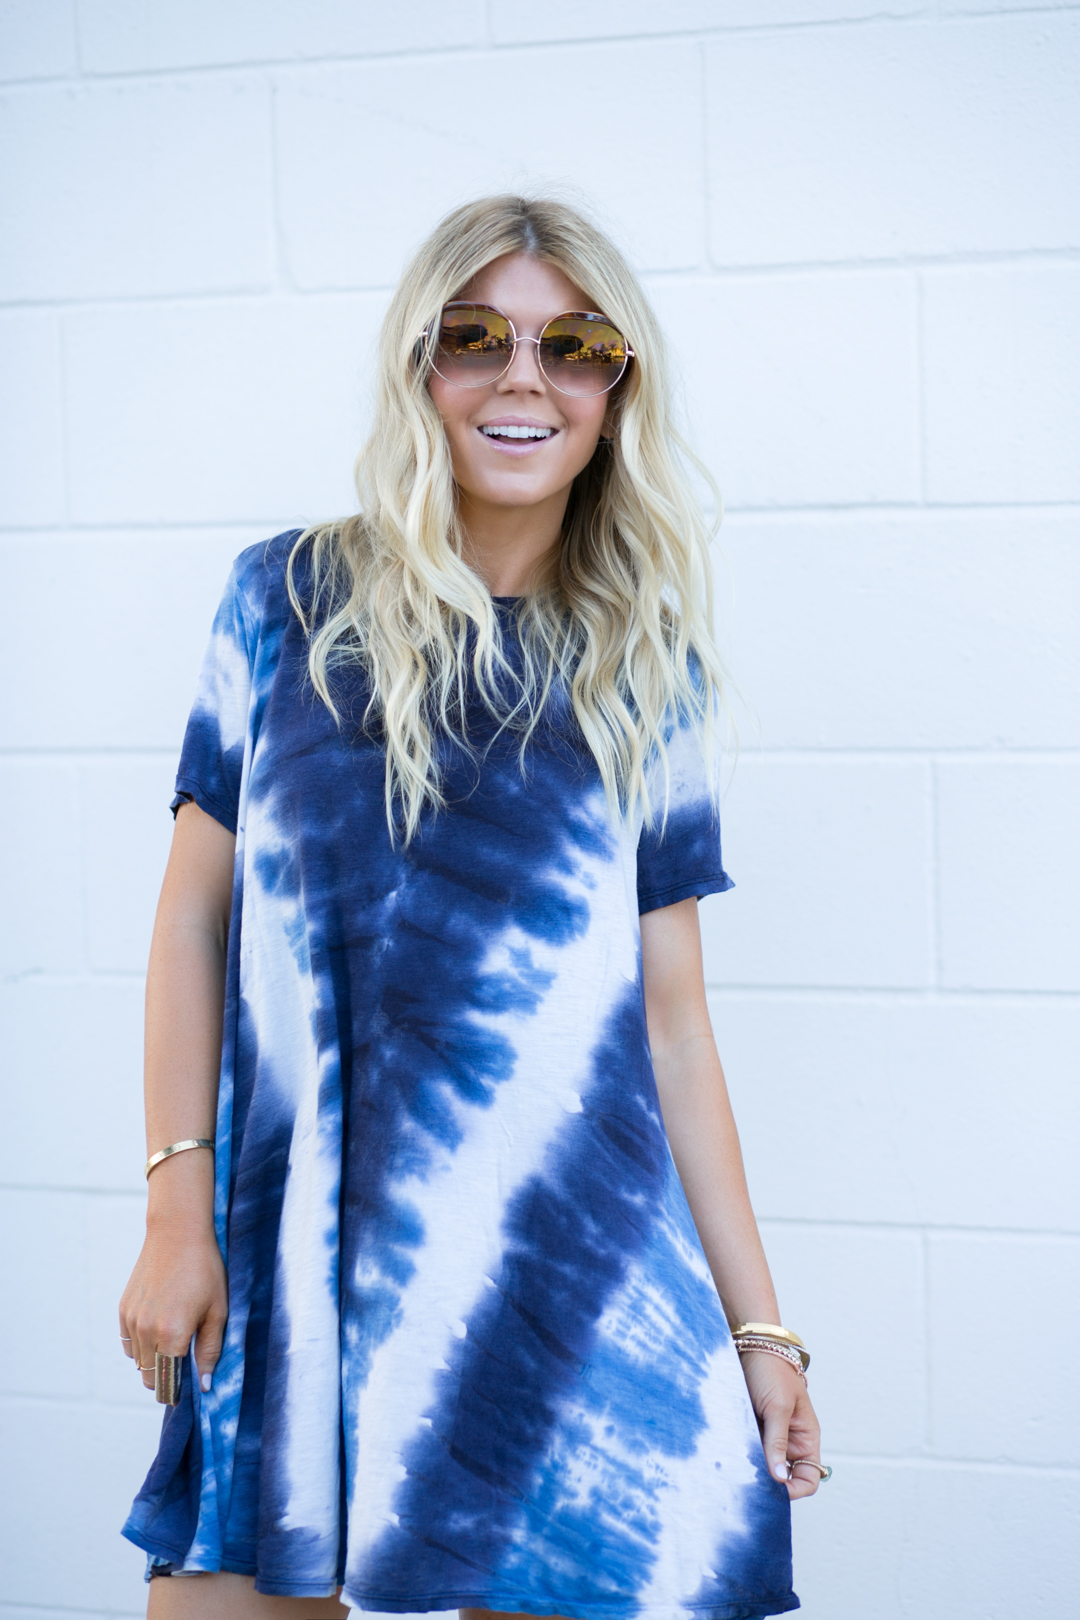 Lisa Allen of Lunchpails and Lipstick wearing a blue and white tie dye dress from Show Me Your Mumu and Alexander Wang Platforms